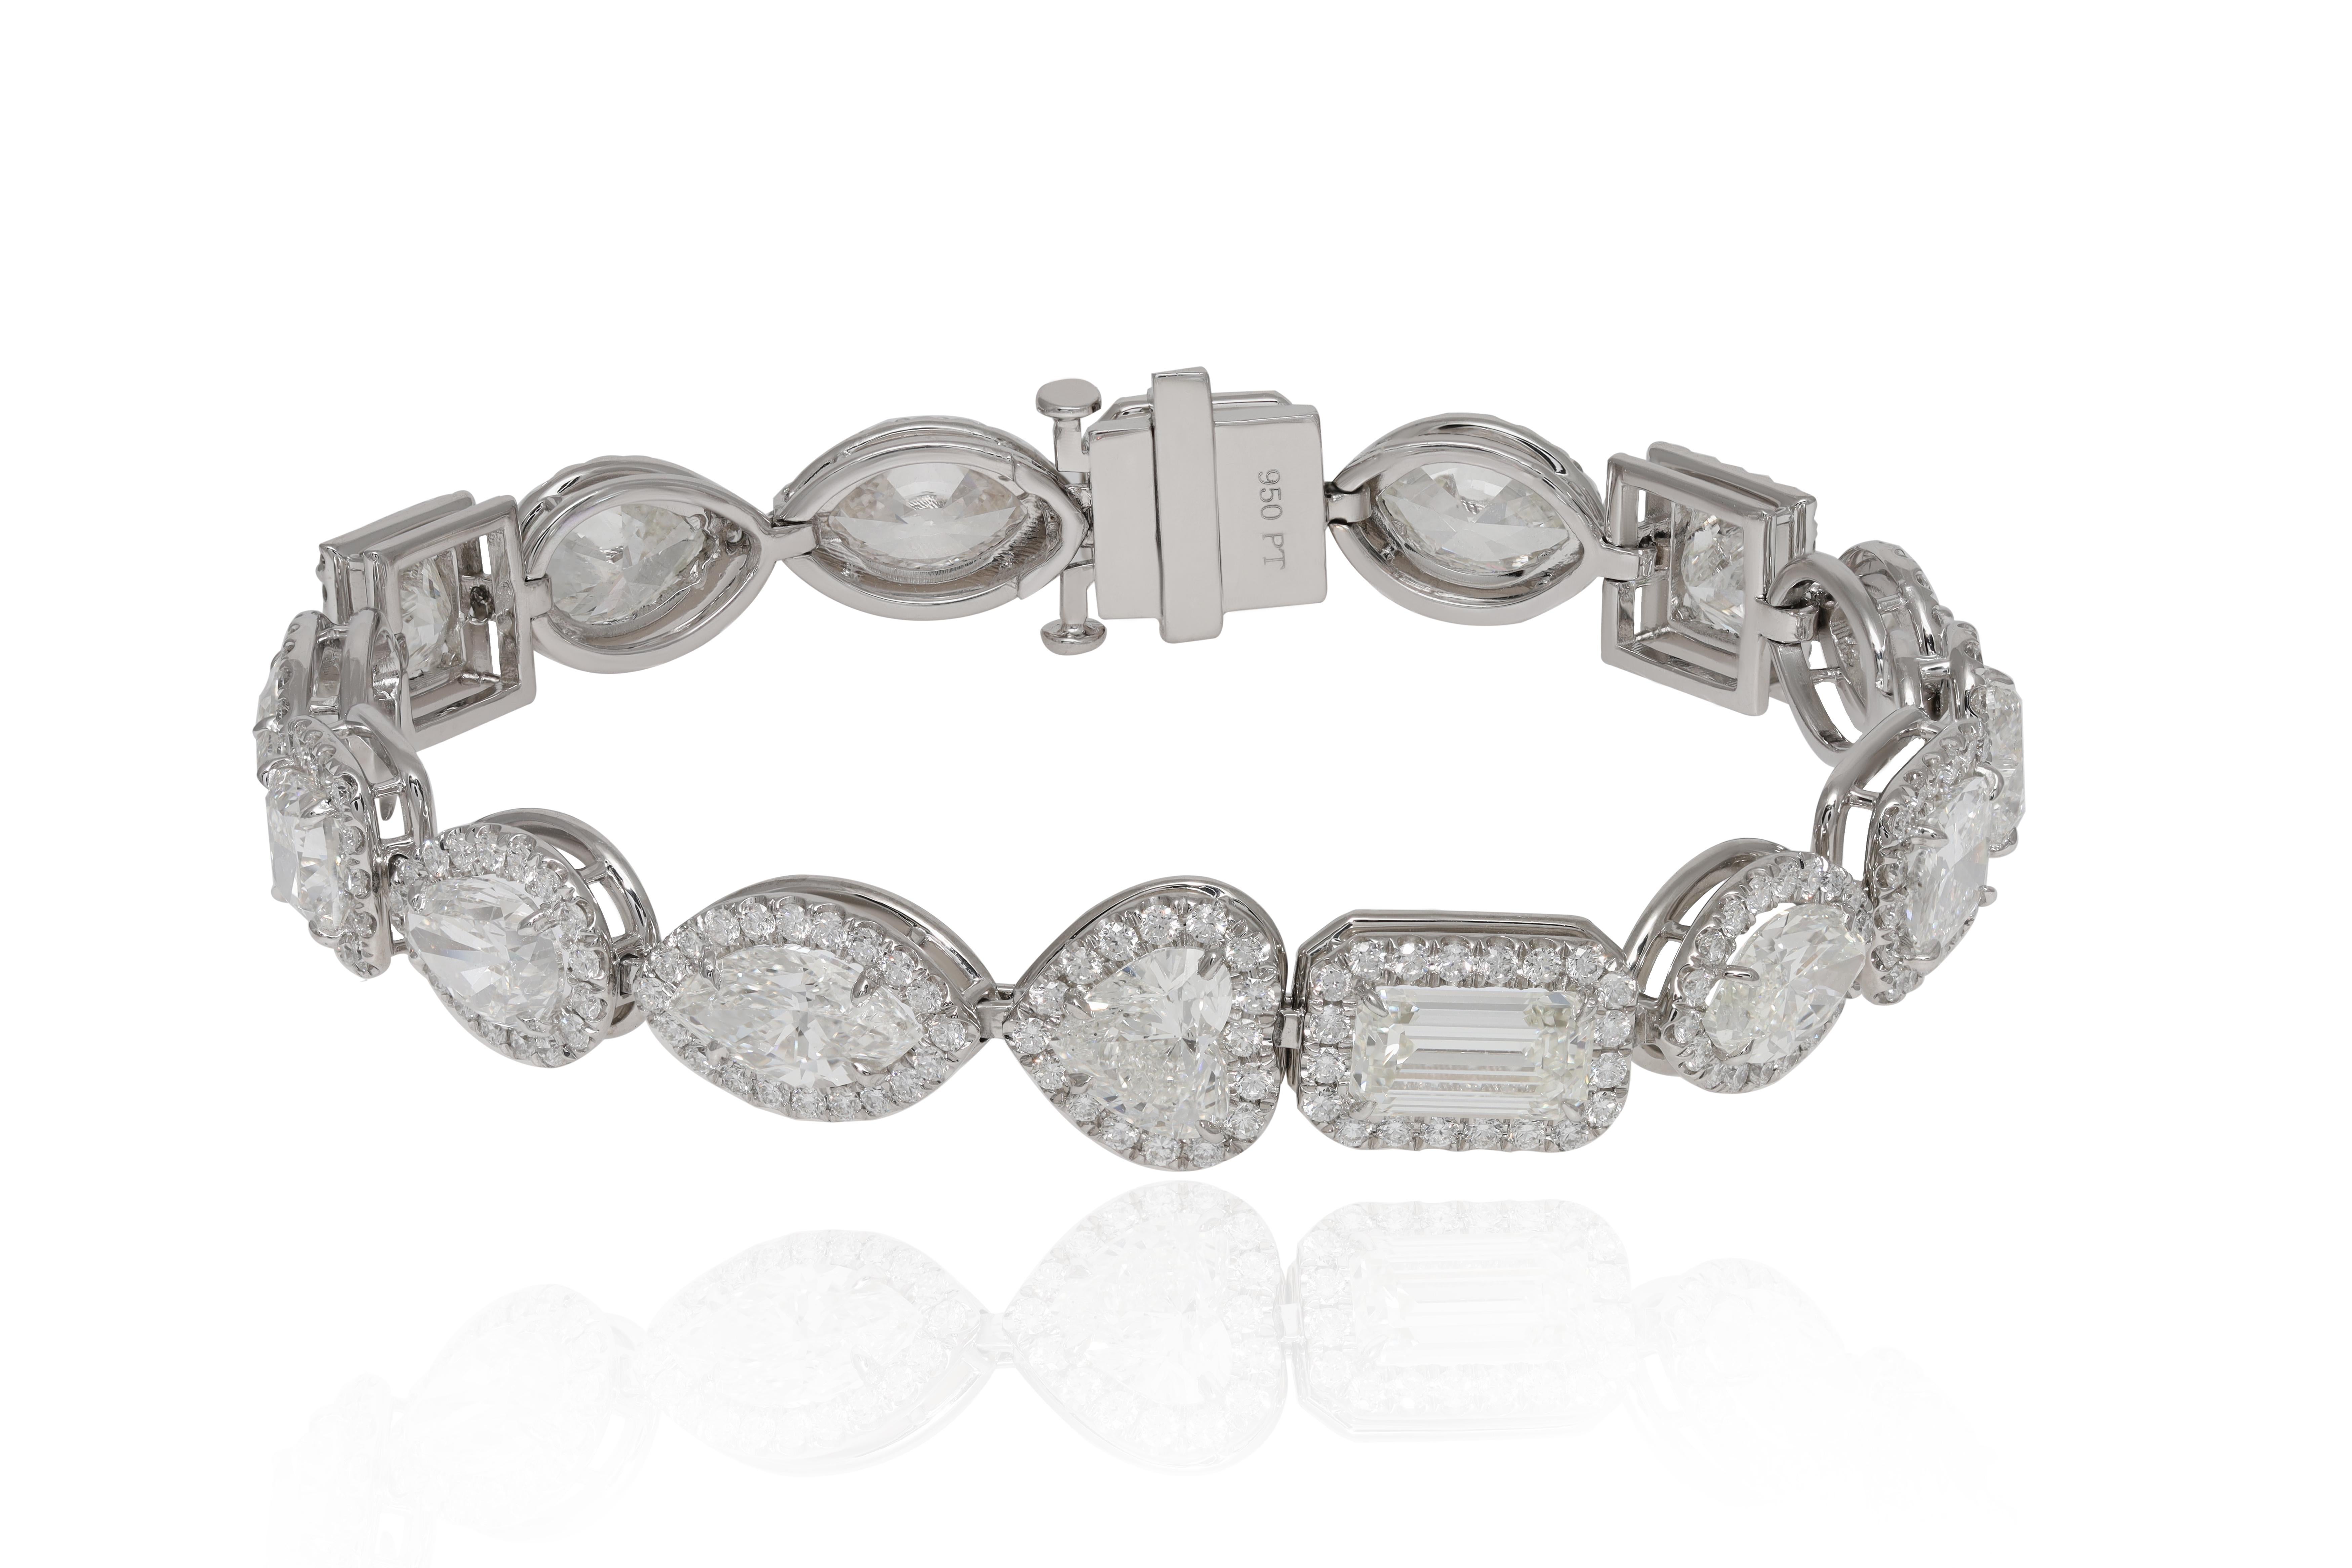 Platinum diamond bracelet featuring 16.44 cts of multi-shaped GIA certified diamonds surrounded by 3.00 cts of round diamonds forming a halo design (GHI-VVS2-SI2)
Diana M. is a leading supplier of top-quality fine jewelry for over 35 years.
Diana M